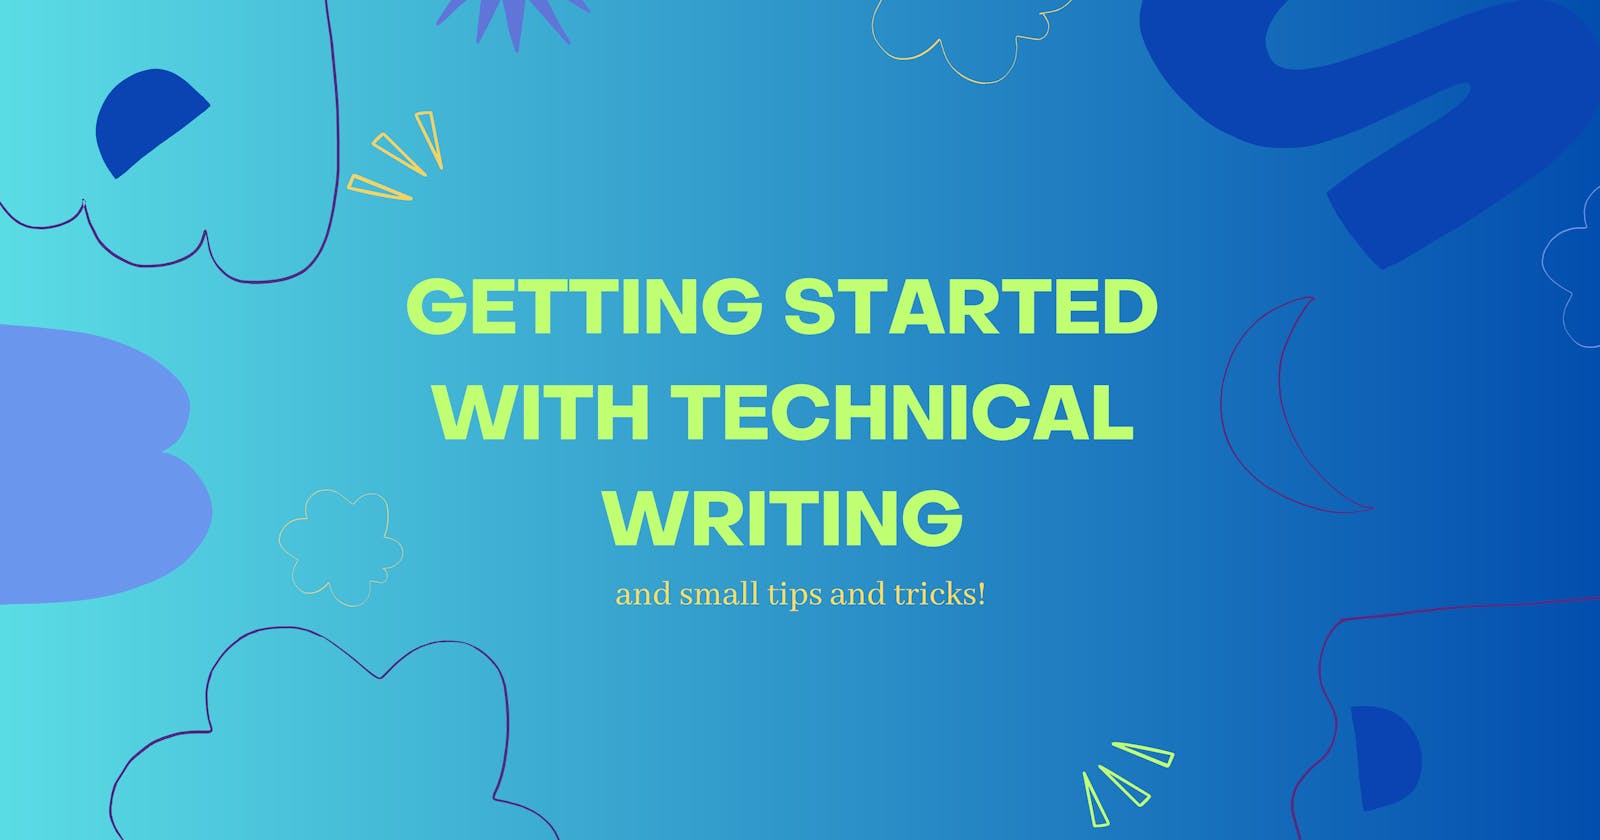 Technical Writing - Your pathway to get started!